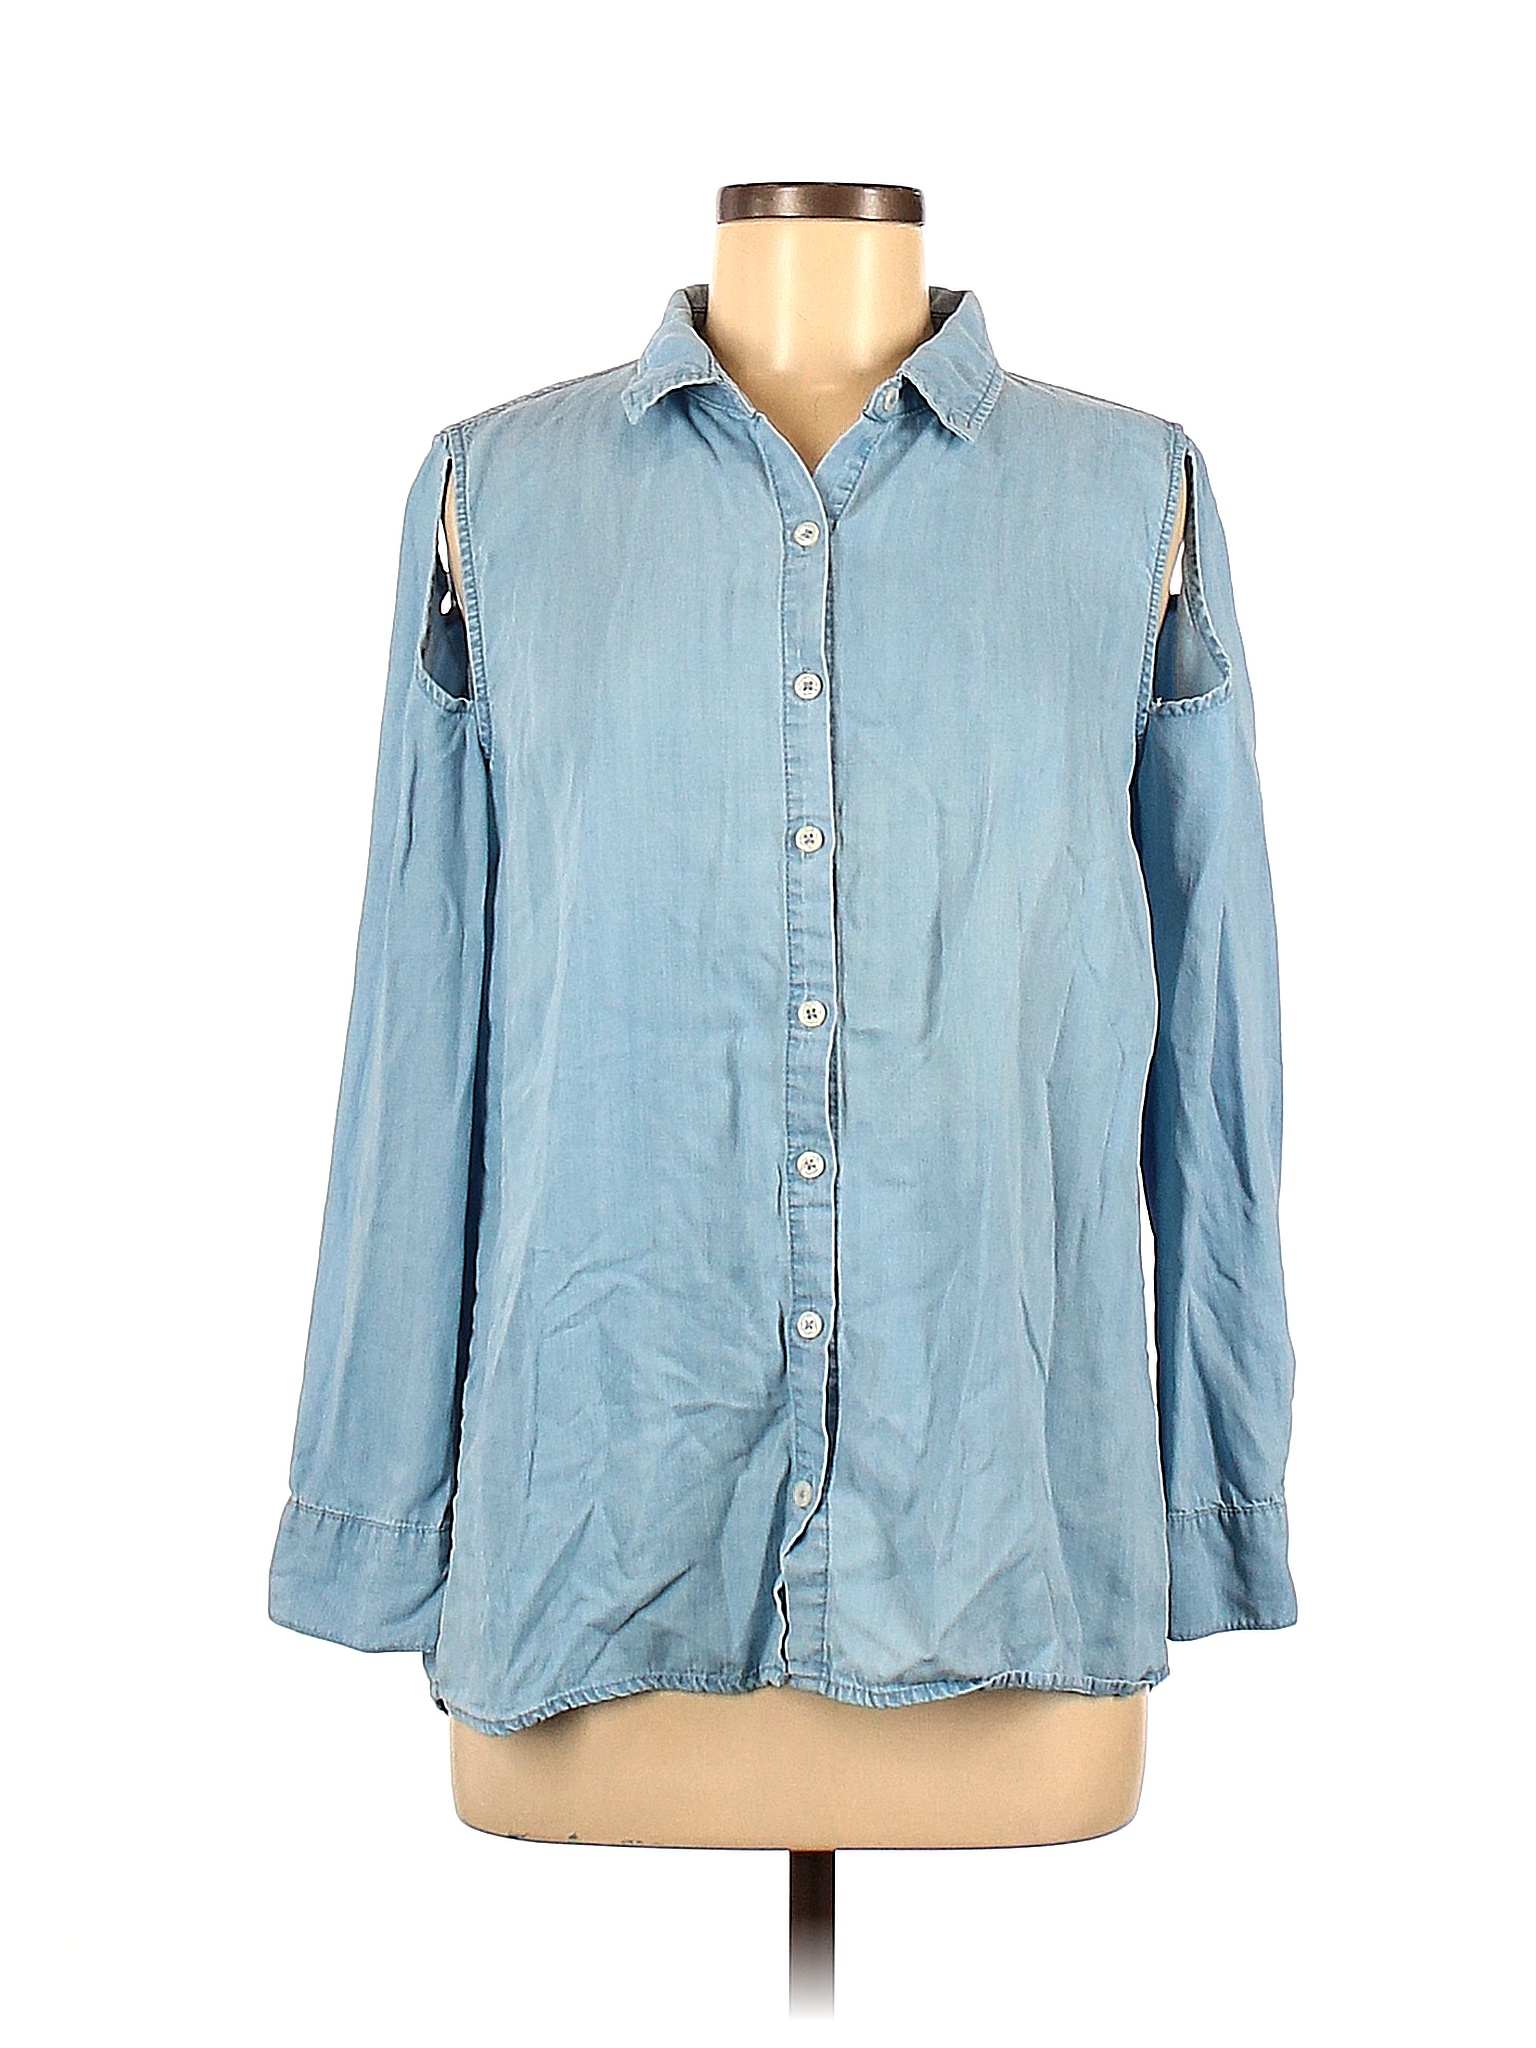 Peck & Peck 100% Lyocell Solid Blue Long Sleeve Button-Down Shirt Size ...